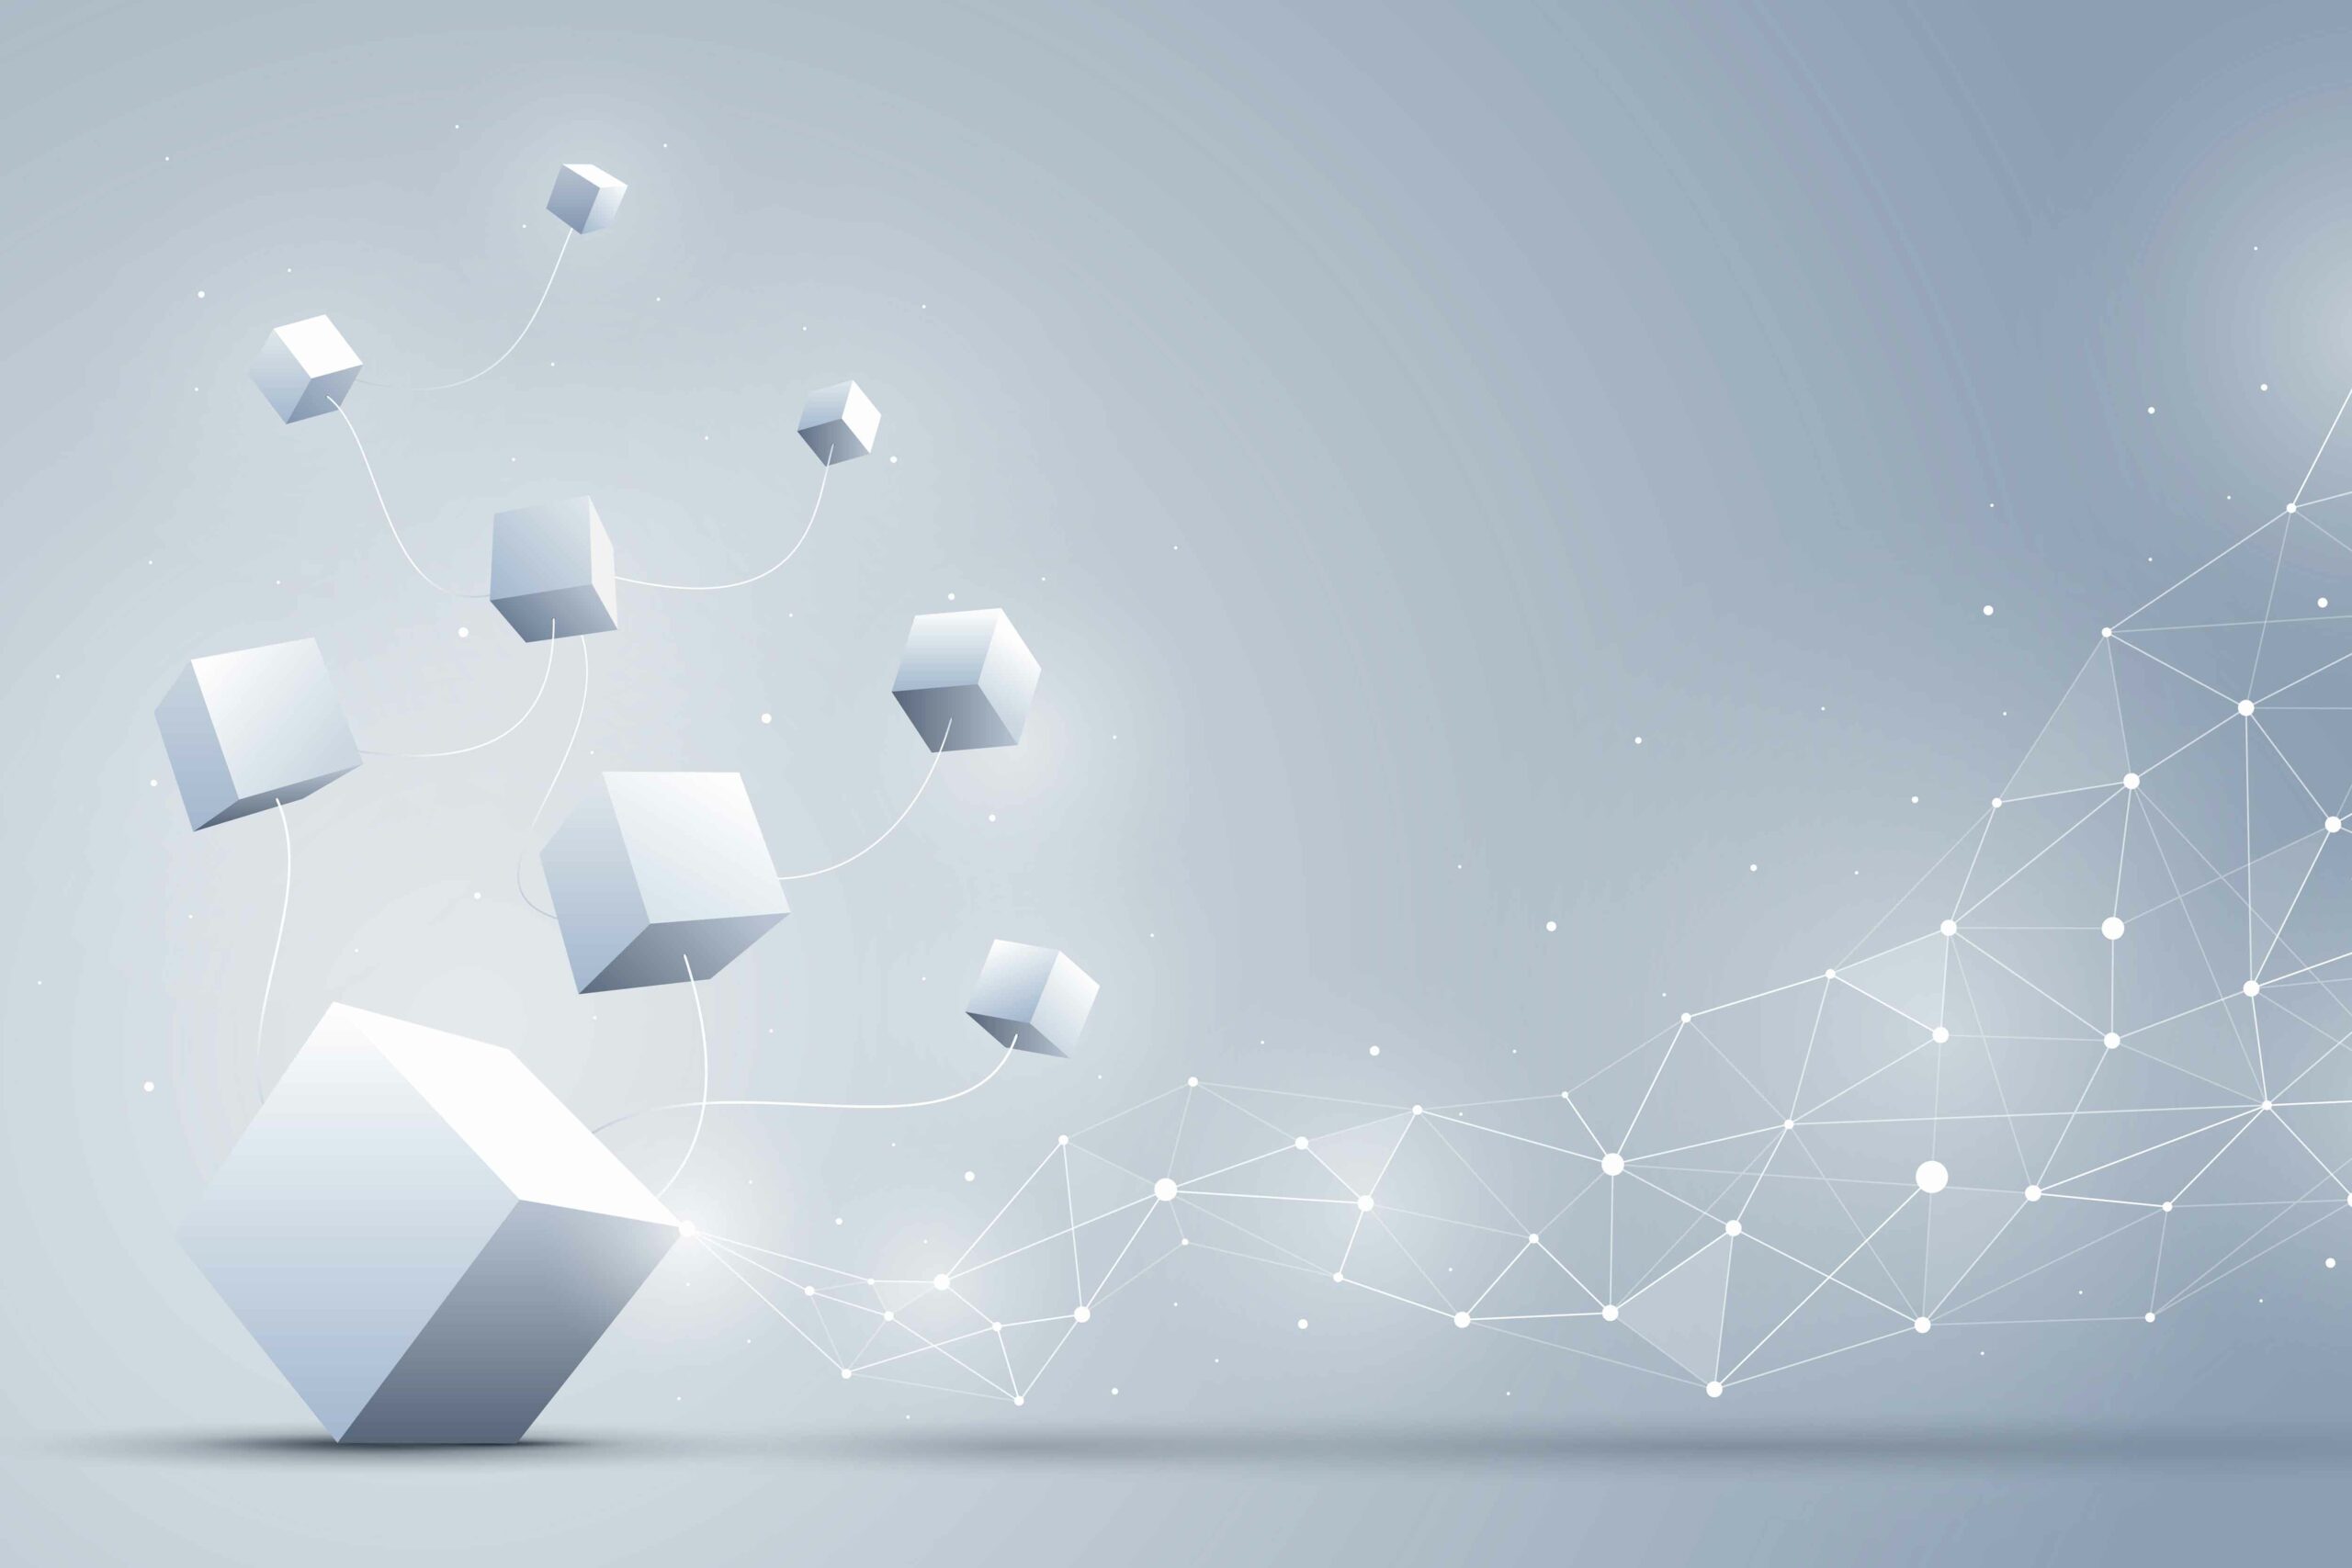 4 Things to Consider Before Deploying Hyperledger Fabric in the Blockchain Network